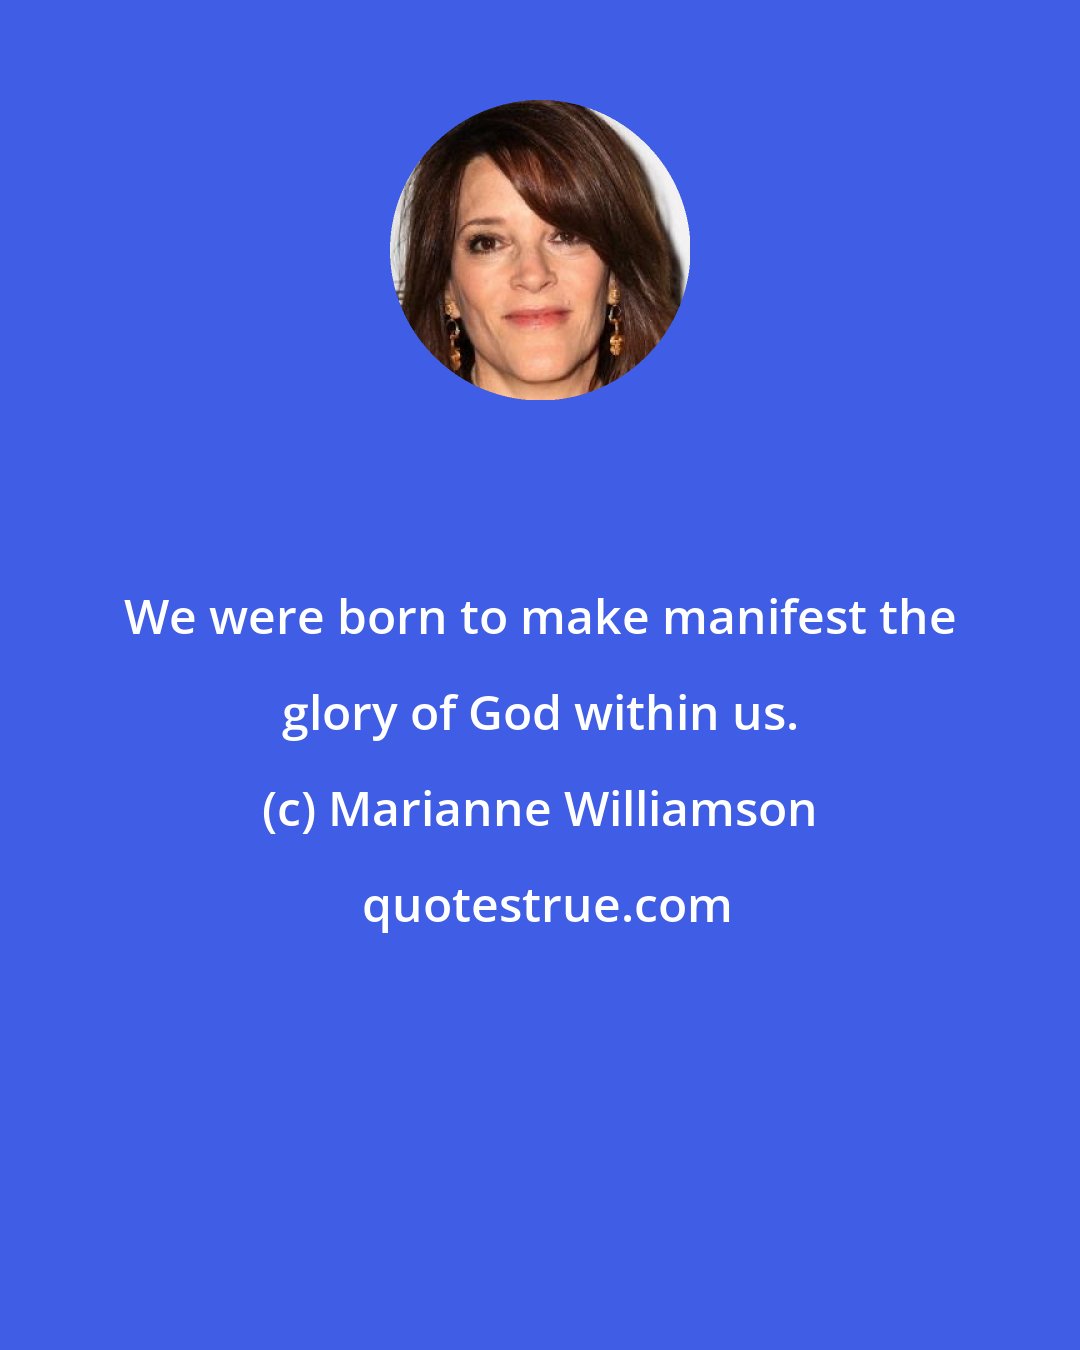 Marianne Williamson: We were born to make manifest the glory of God within us.